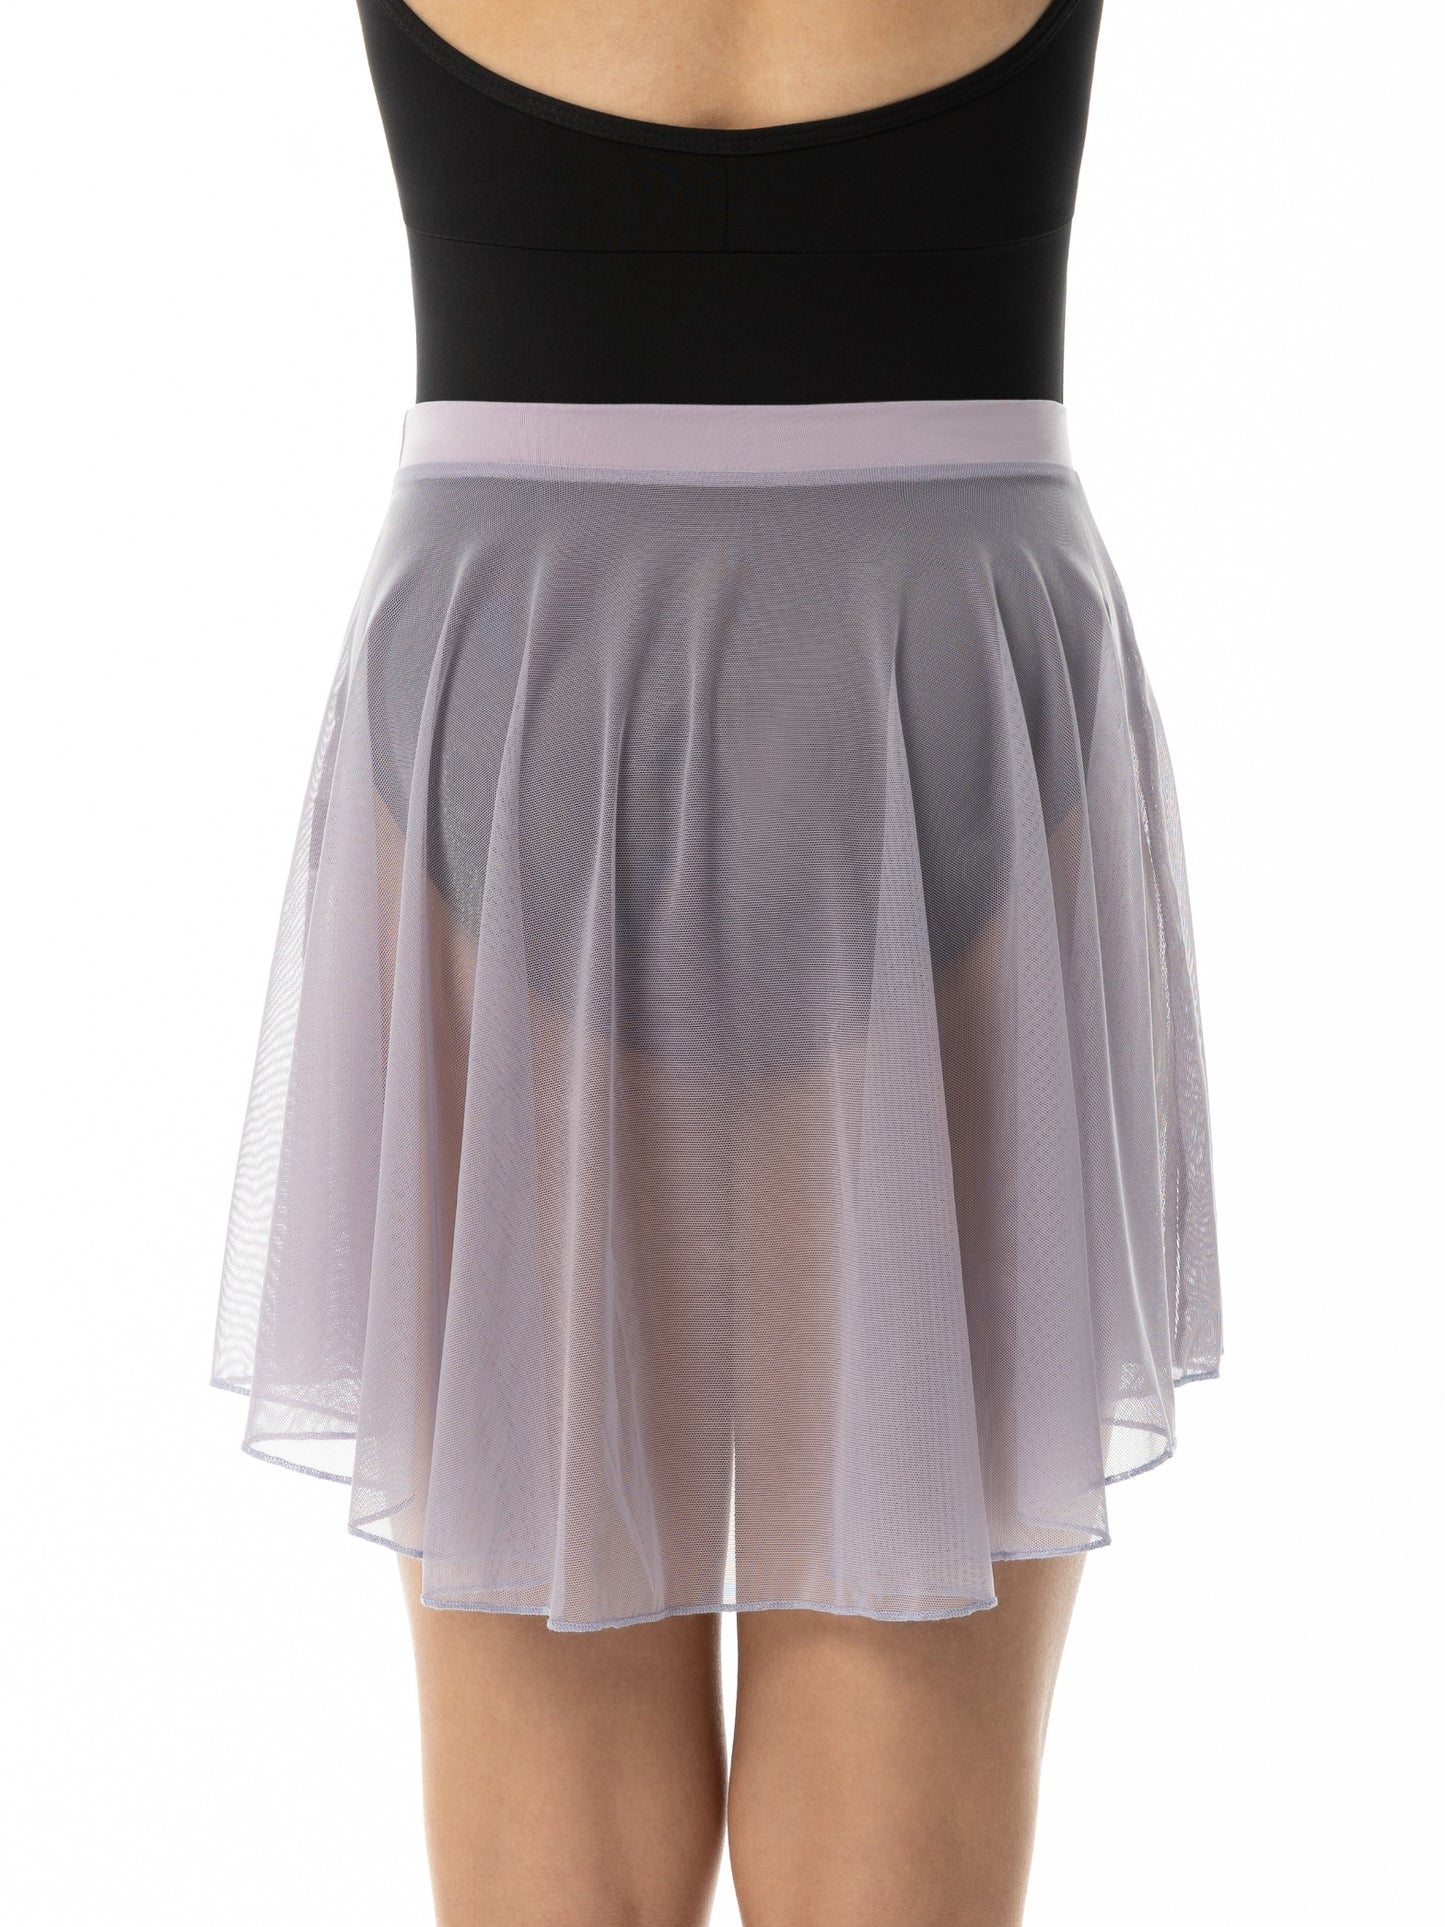 Stormy Midi Length High Low adult skirt (1016A)